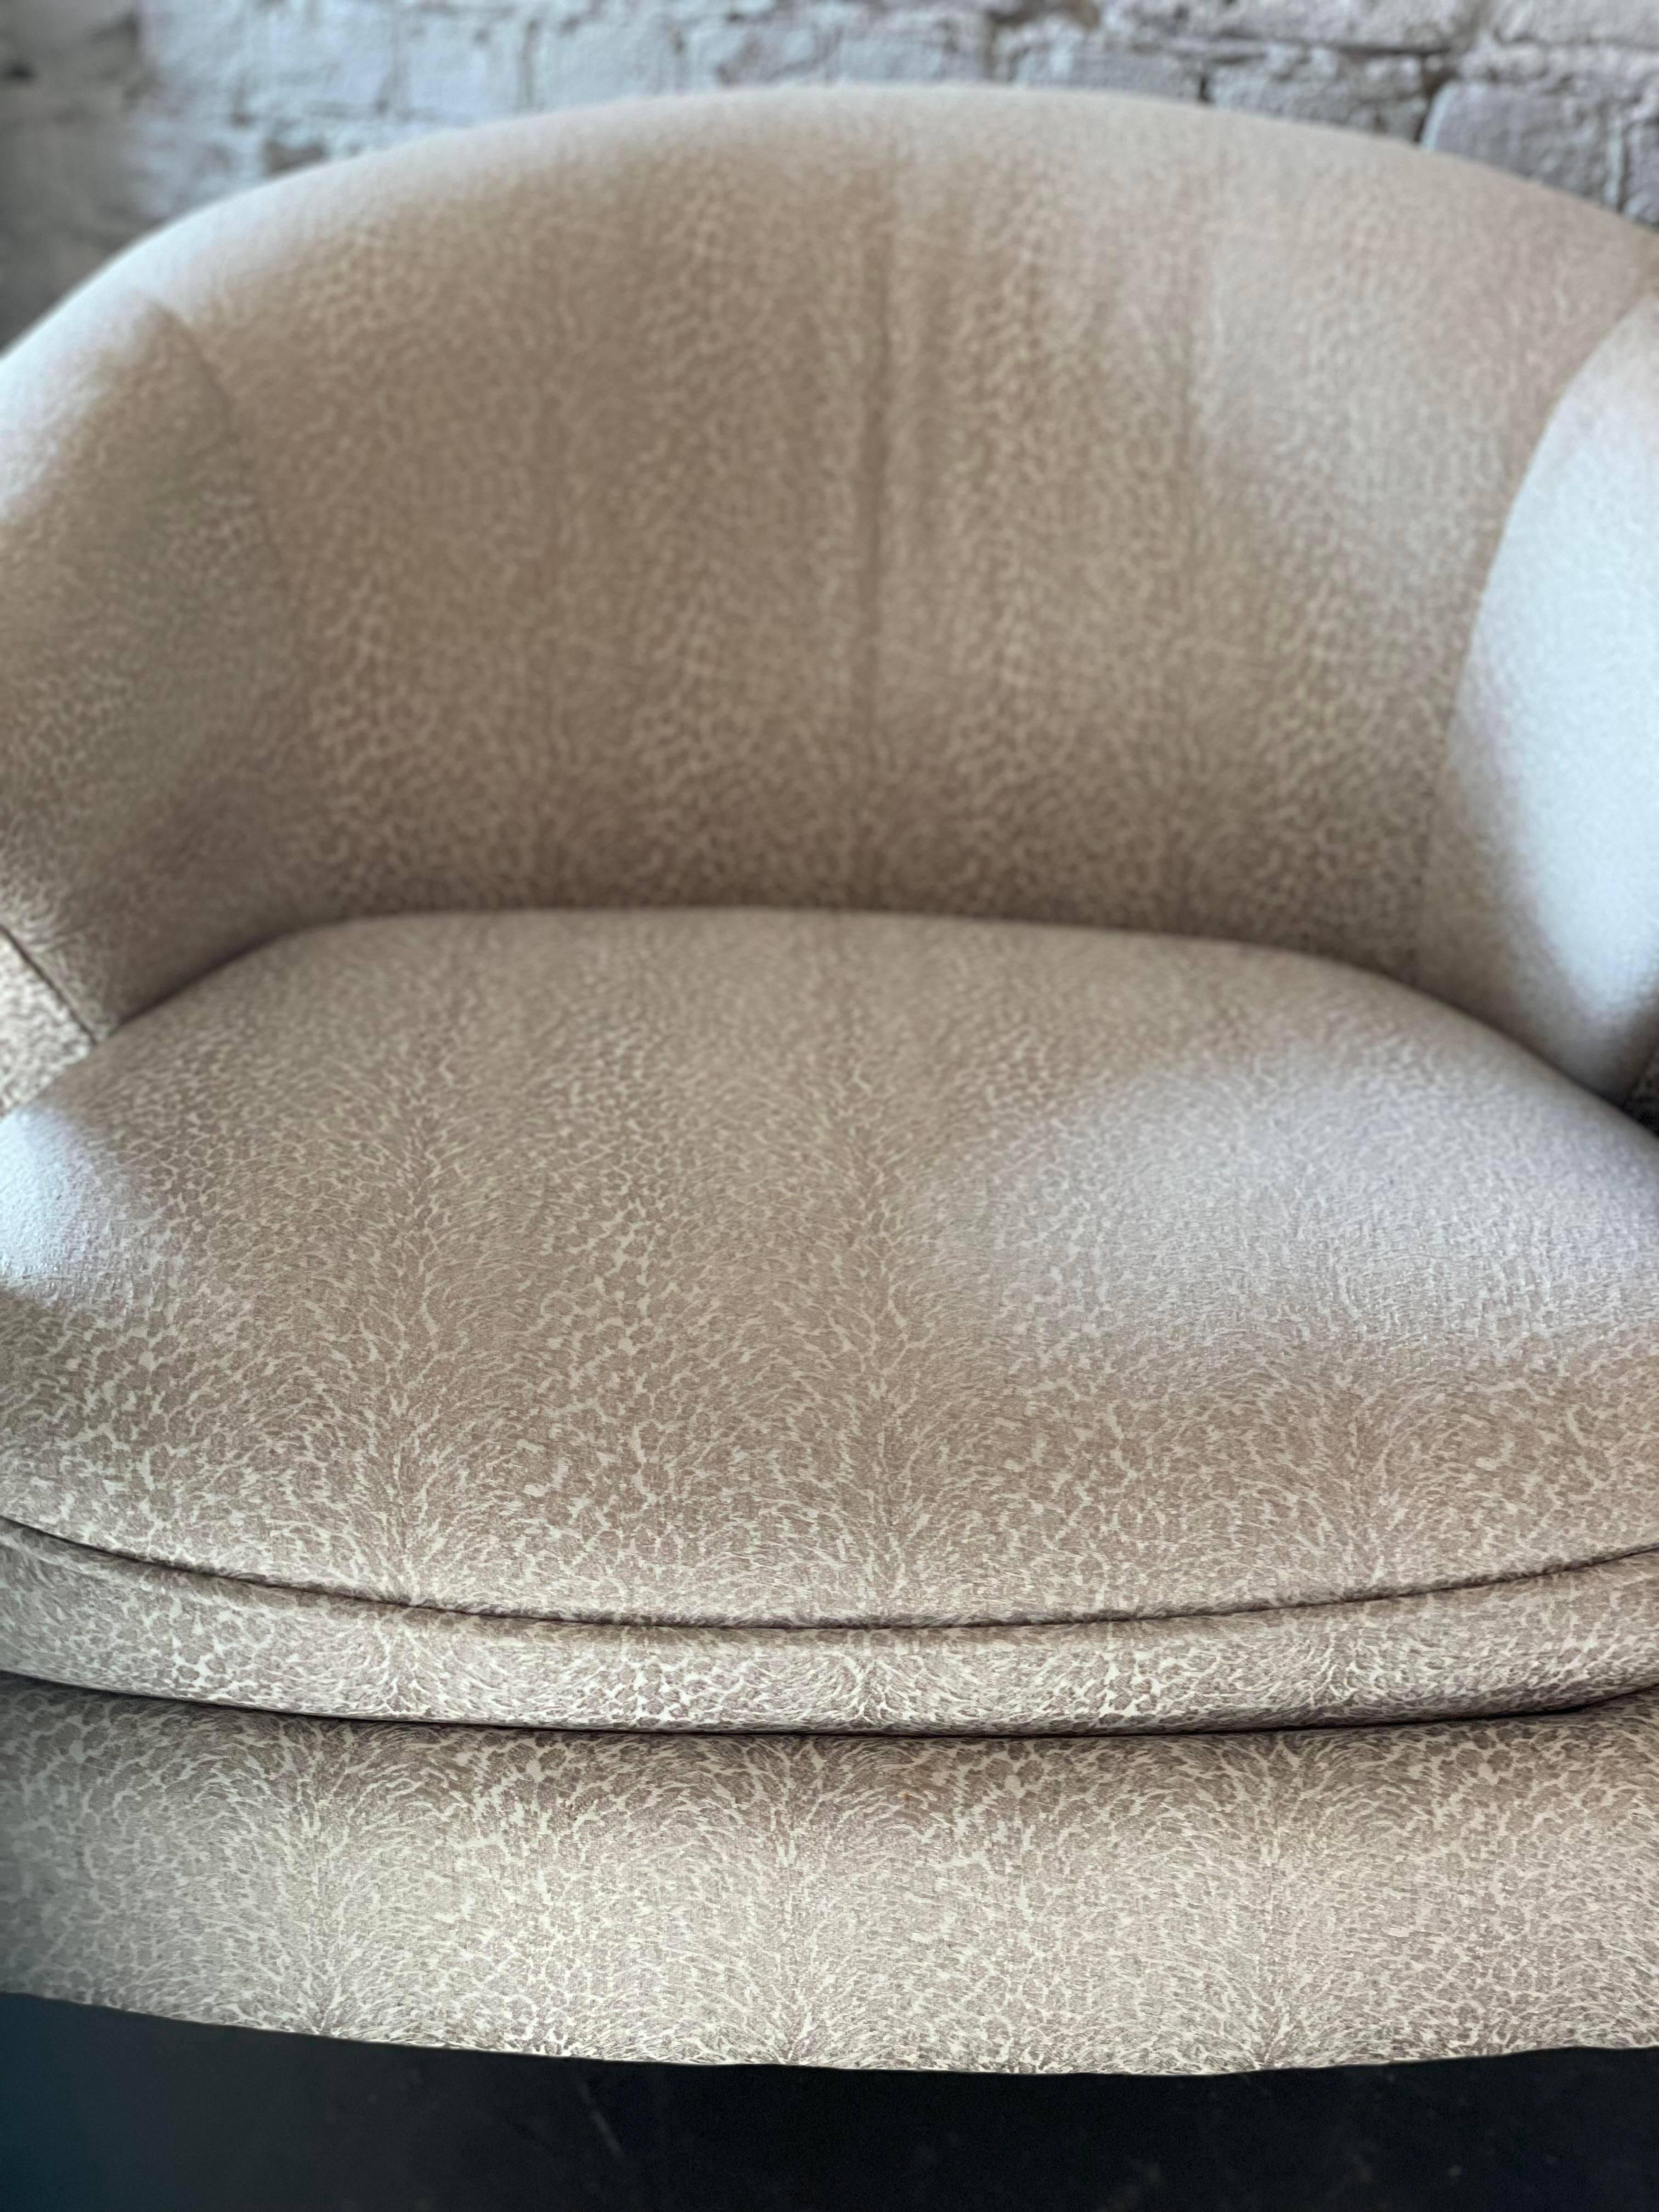 Post-Modern 1980s Postmodern Sculptural Arc Chairs in Beige Upholstery, a Pair For Sale